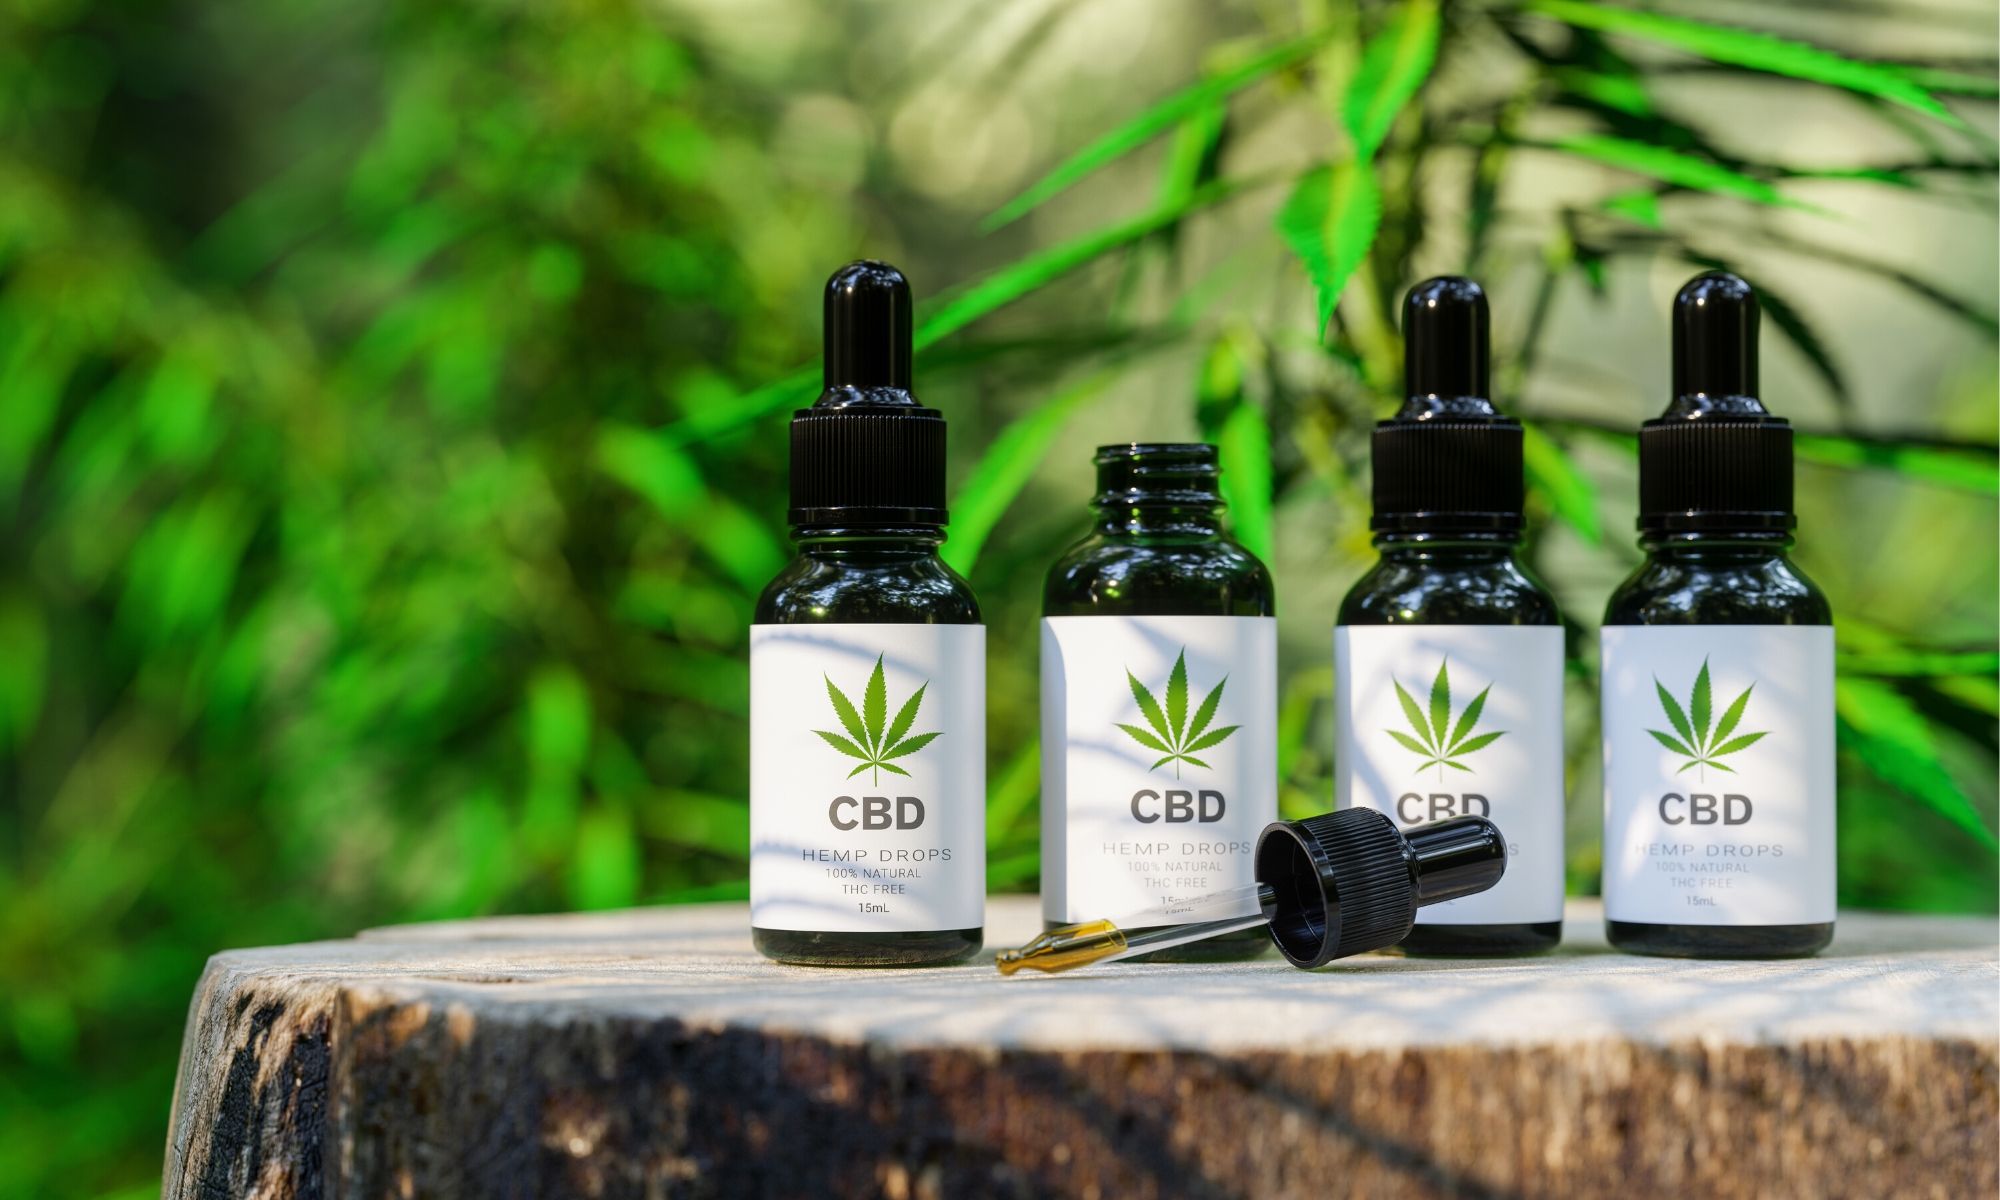 Advertising-Regulations-of-CBD-Products